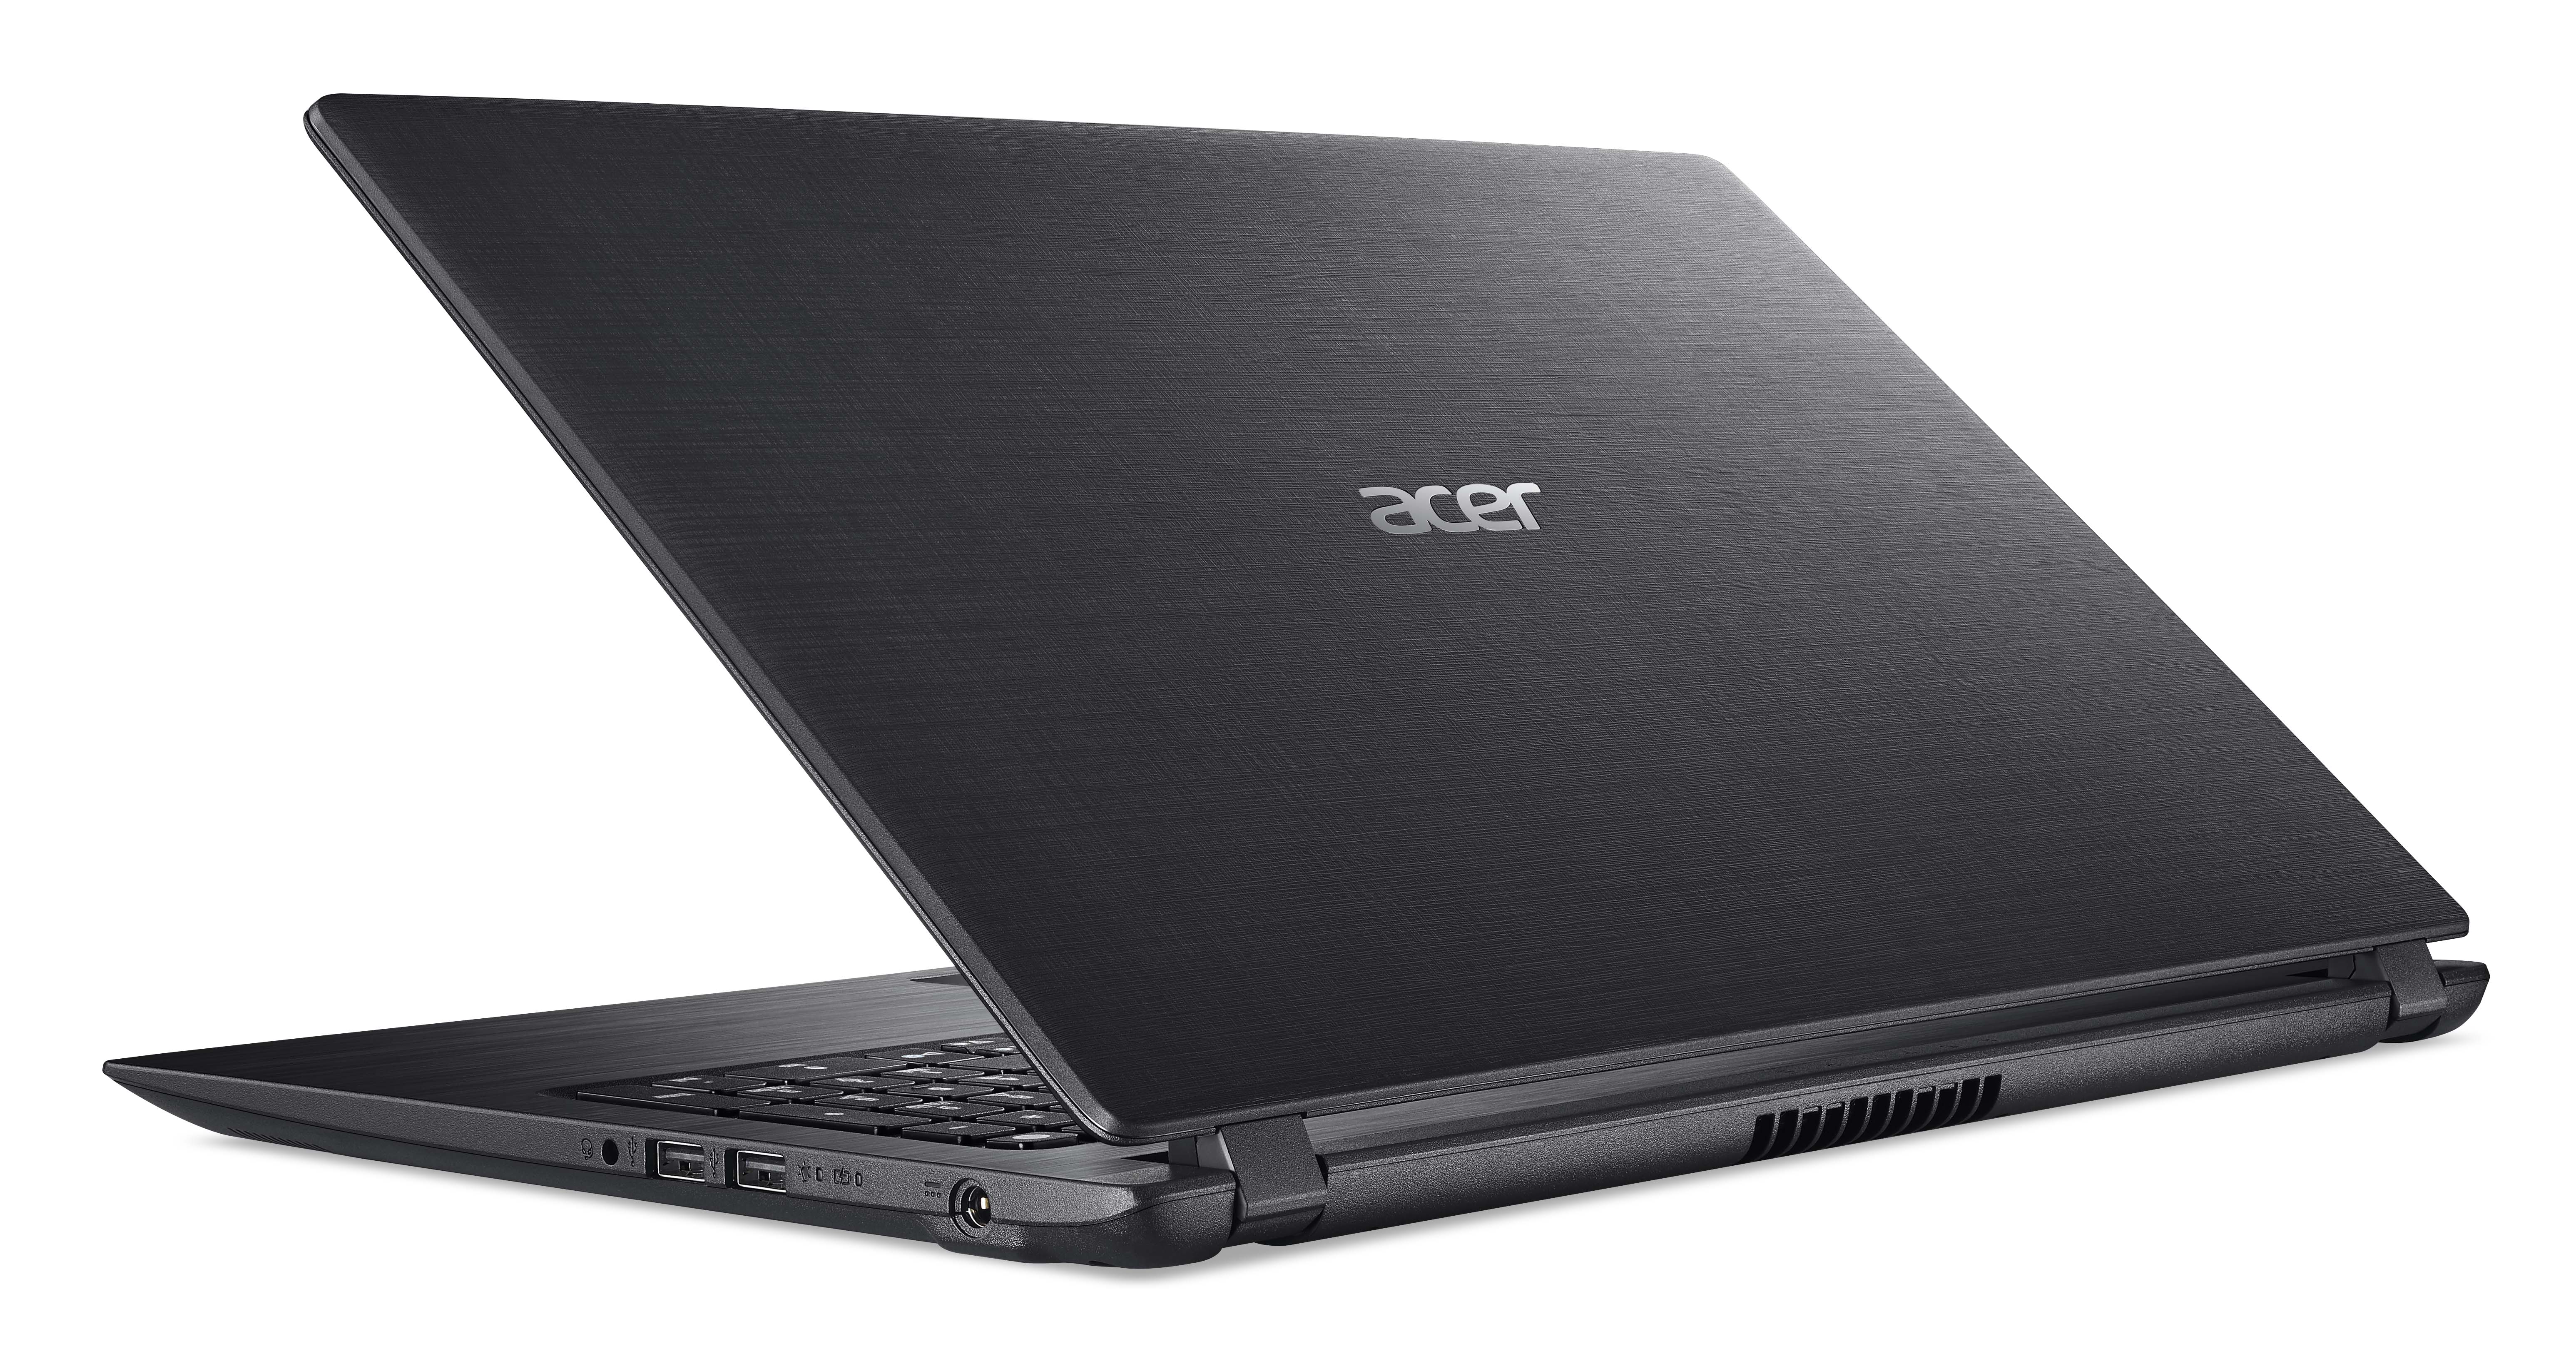 The Acer Aspire 3 with Windows 10